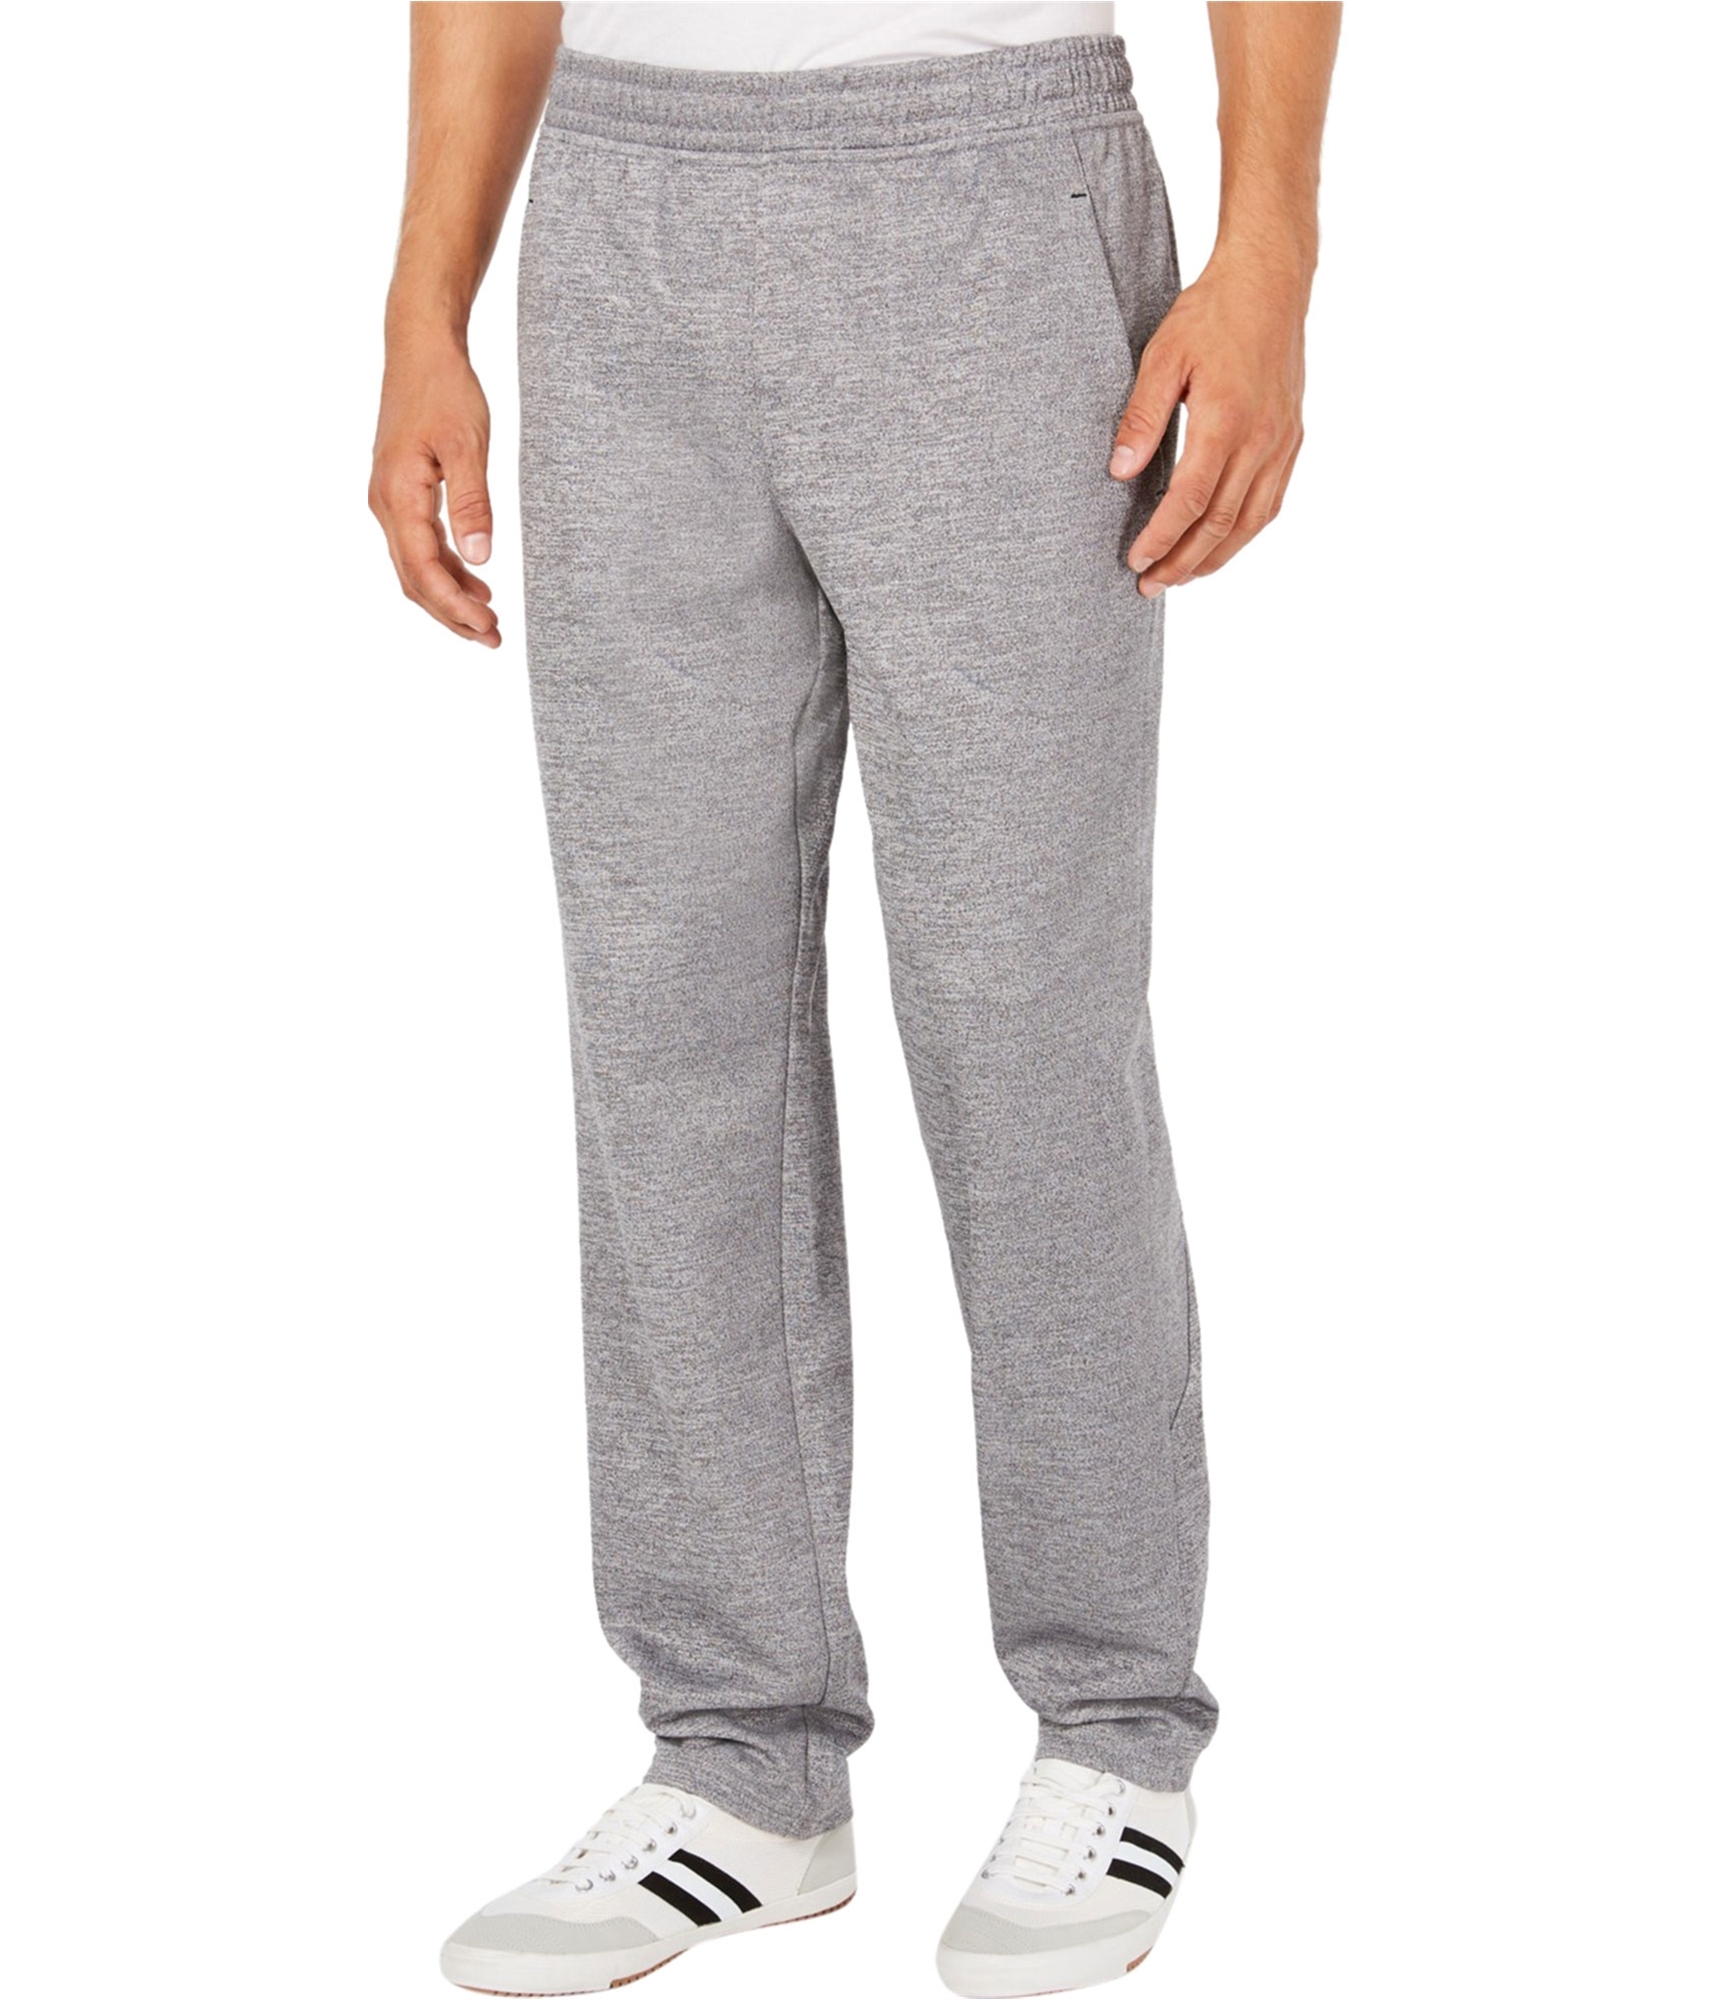 Buy a Ideology Mens Performance Casual Sweatpants | Tagsweekly